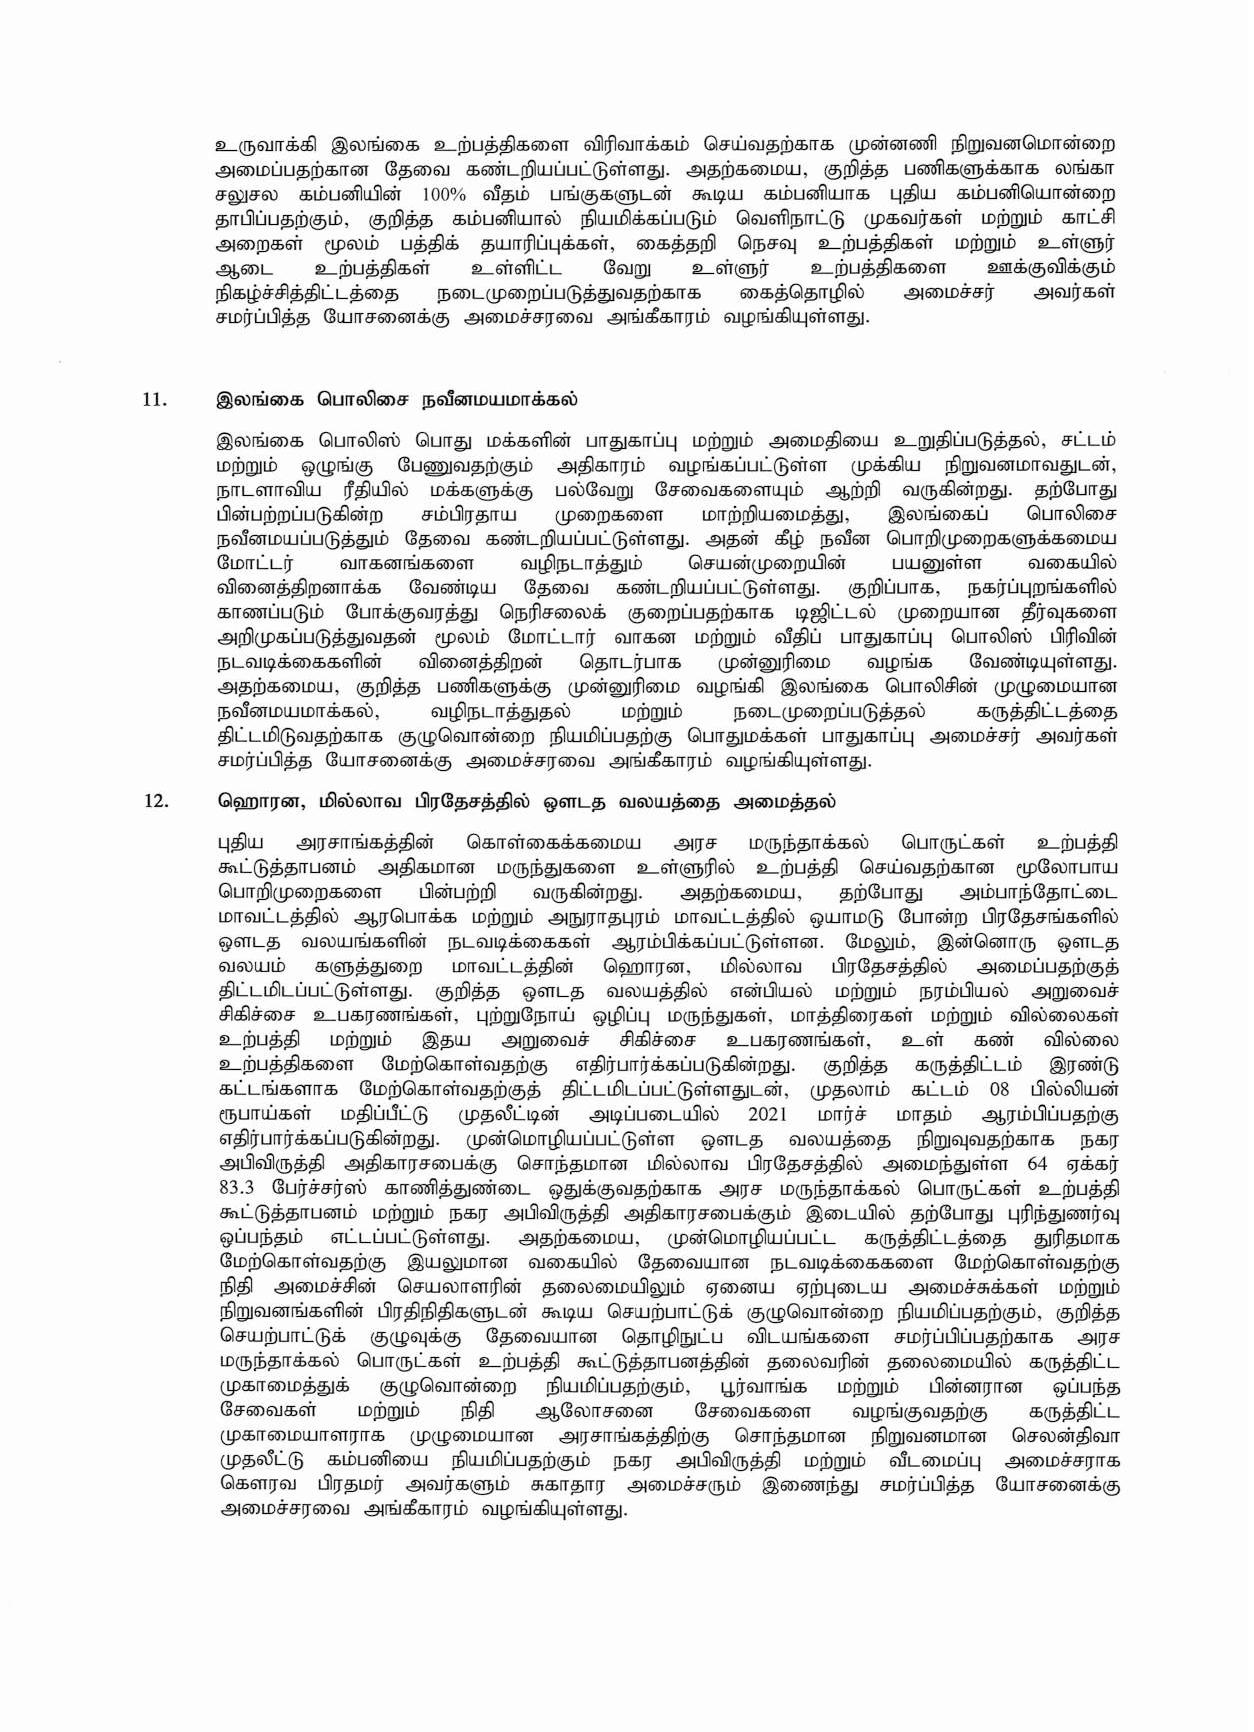 Cabinet Decision on 08.03.2021 Tamil page 004